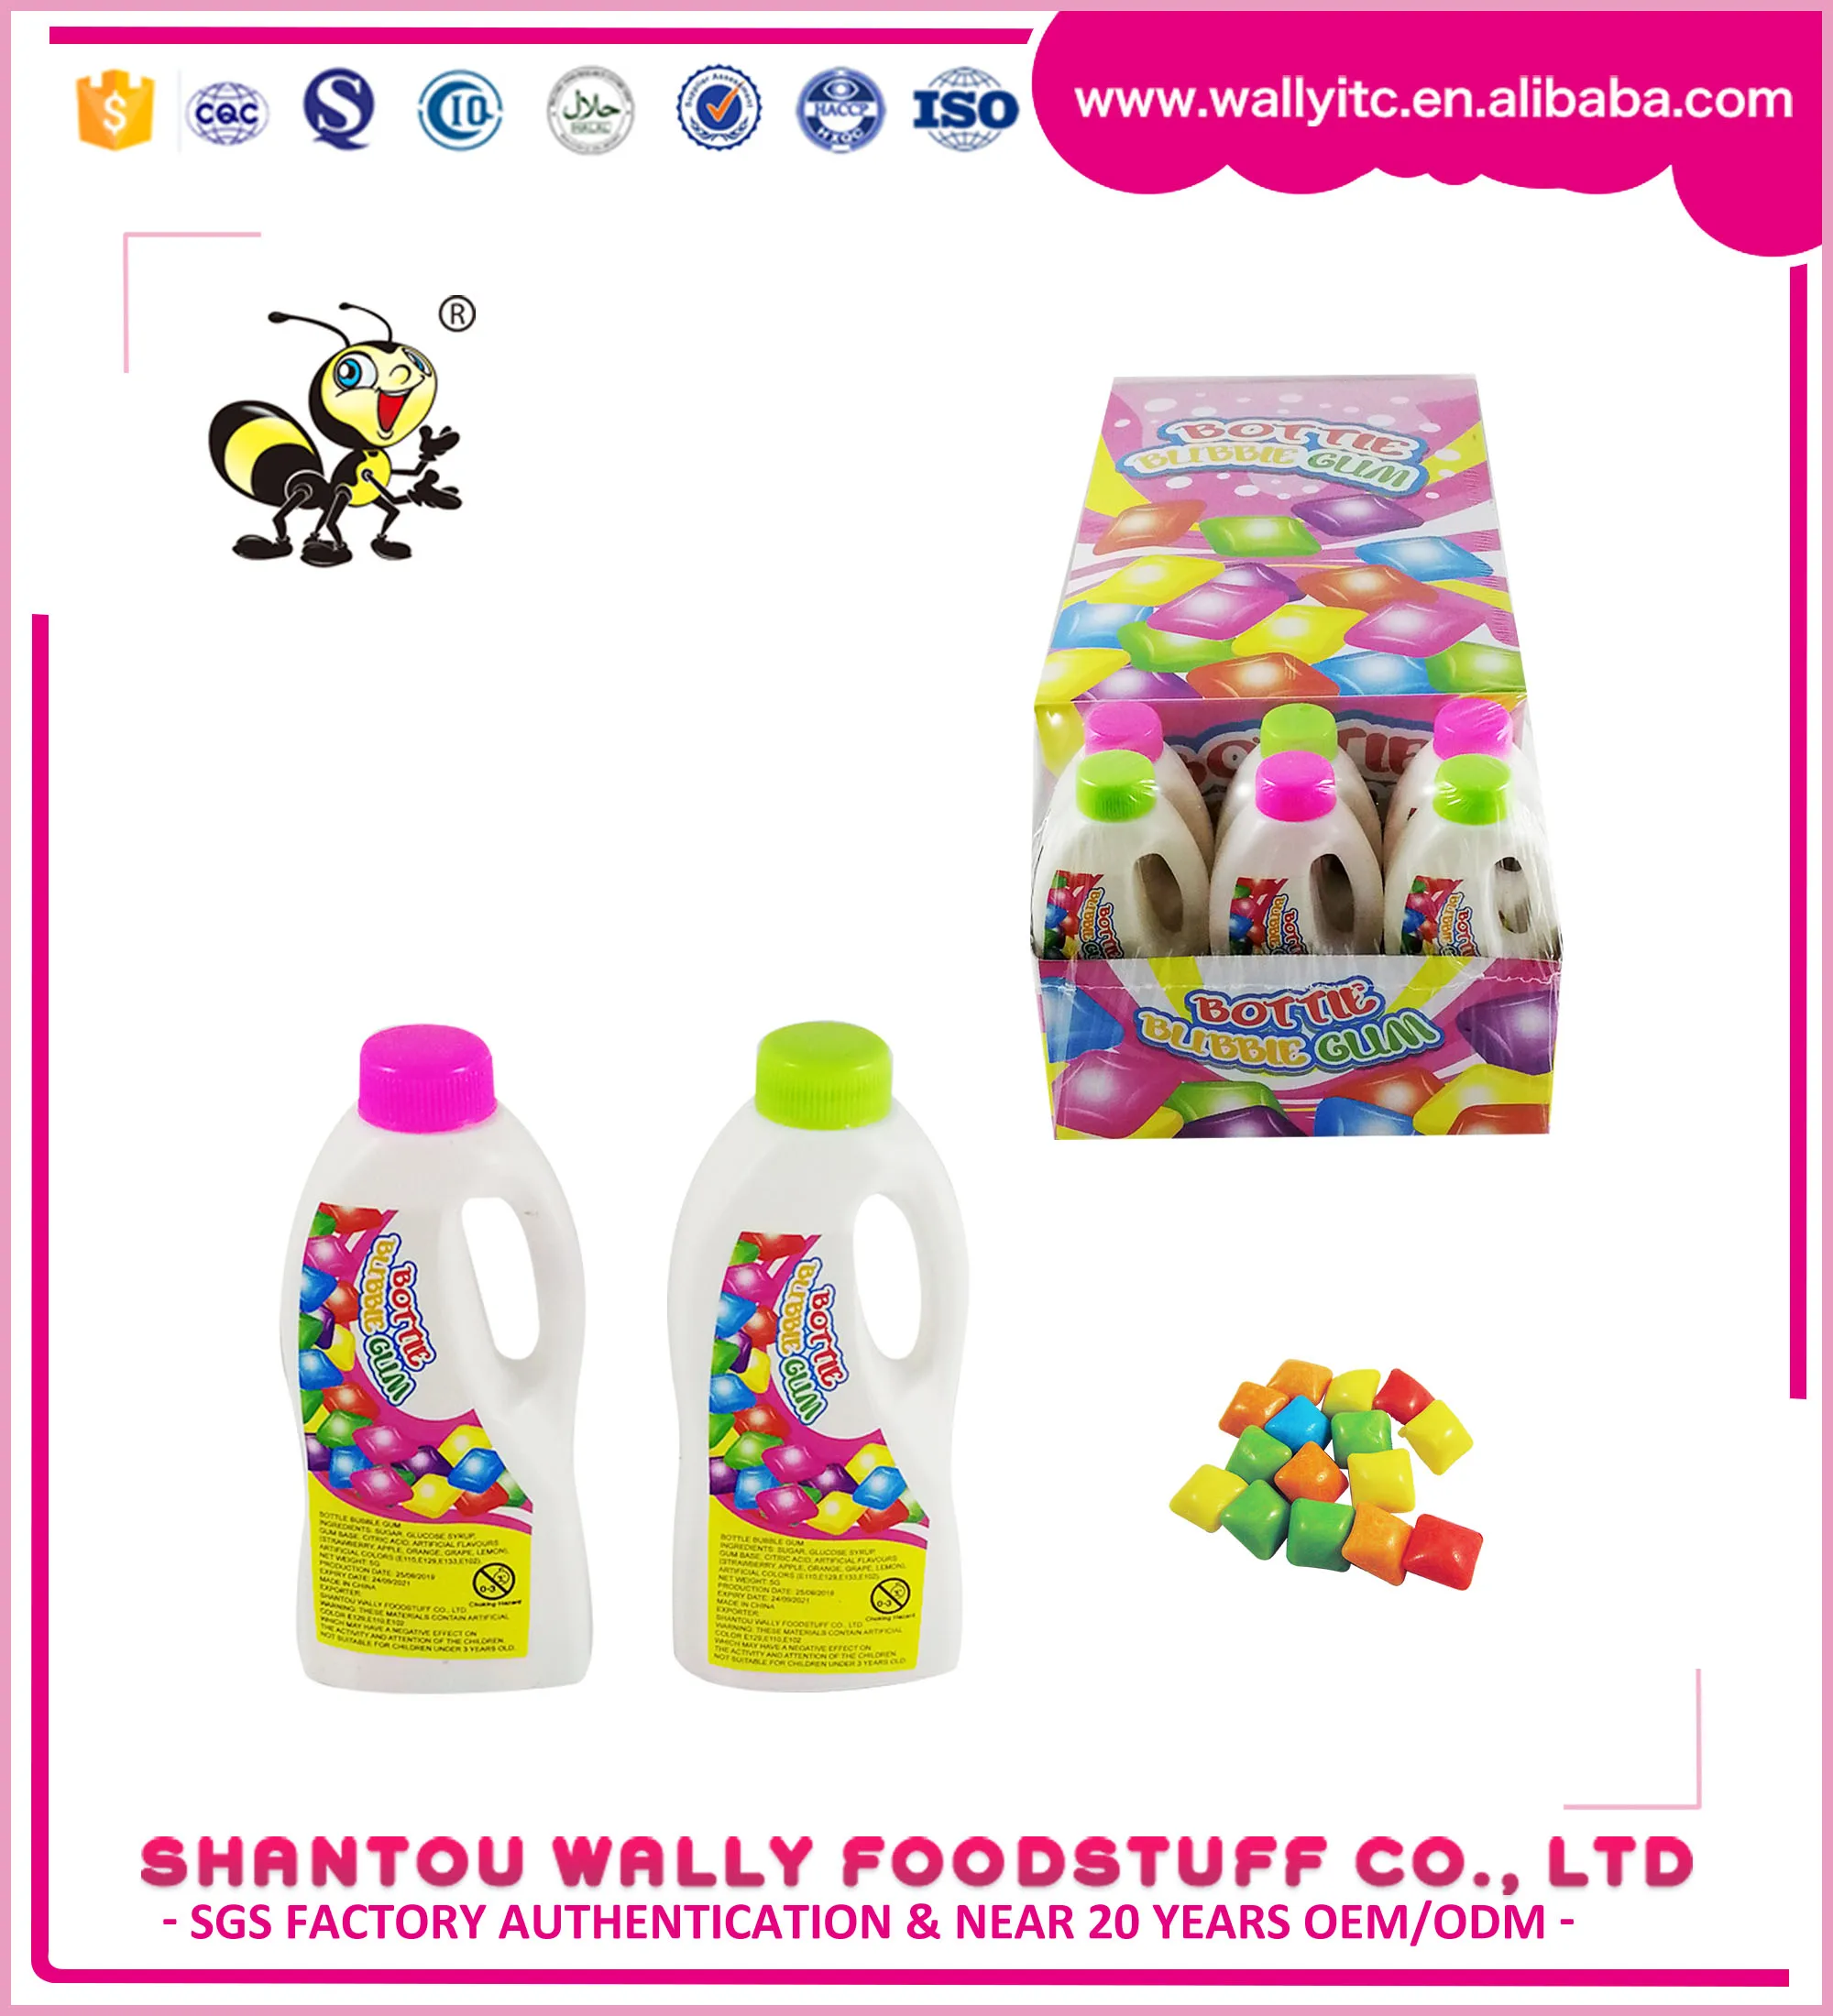 
Chewing Bubble Gum Colourful Candy Laundry Bottle Fruity Chewy China Toy Distributors 